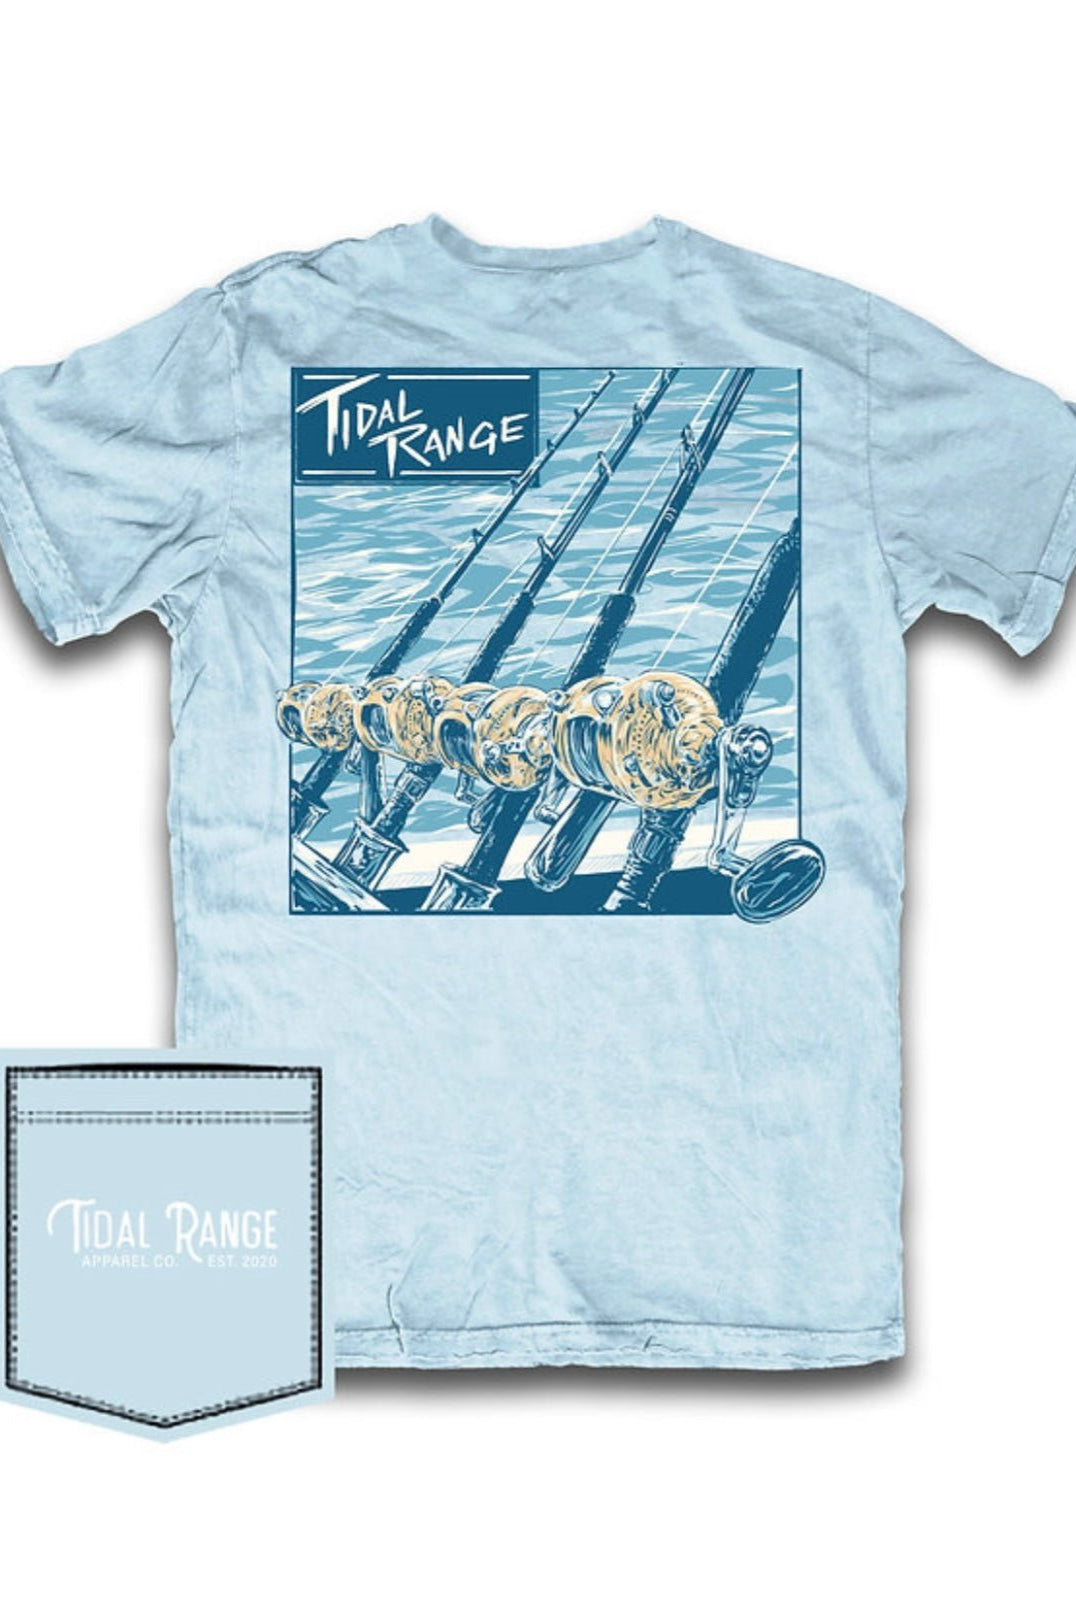 Tidal Range Reels Tee - Graphic Tee -Jimberly's Boutique-Olive Branch-Mississippi